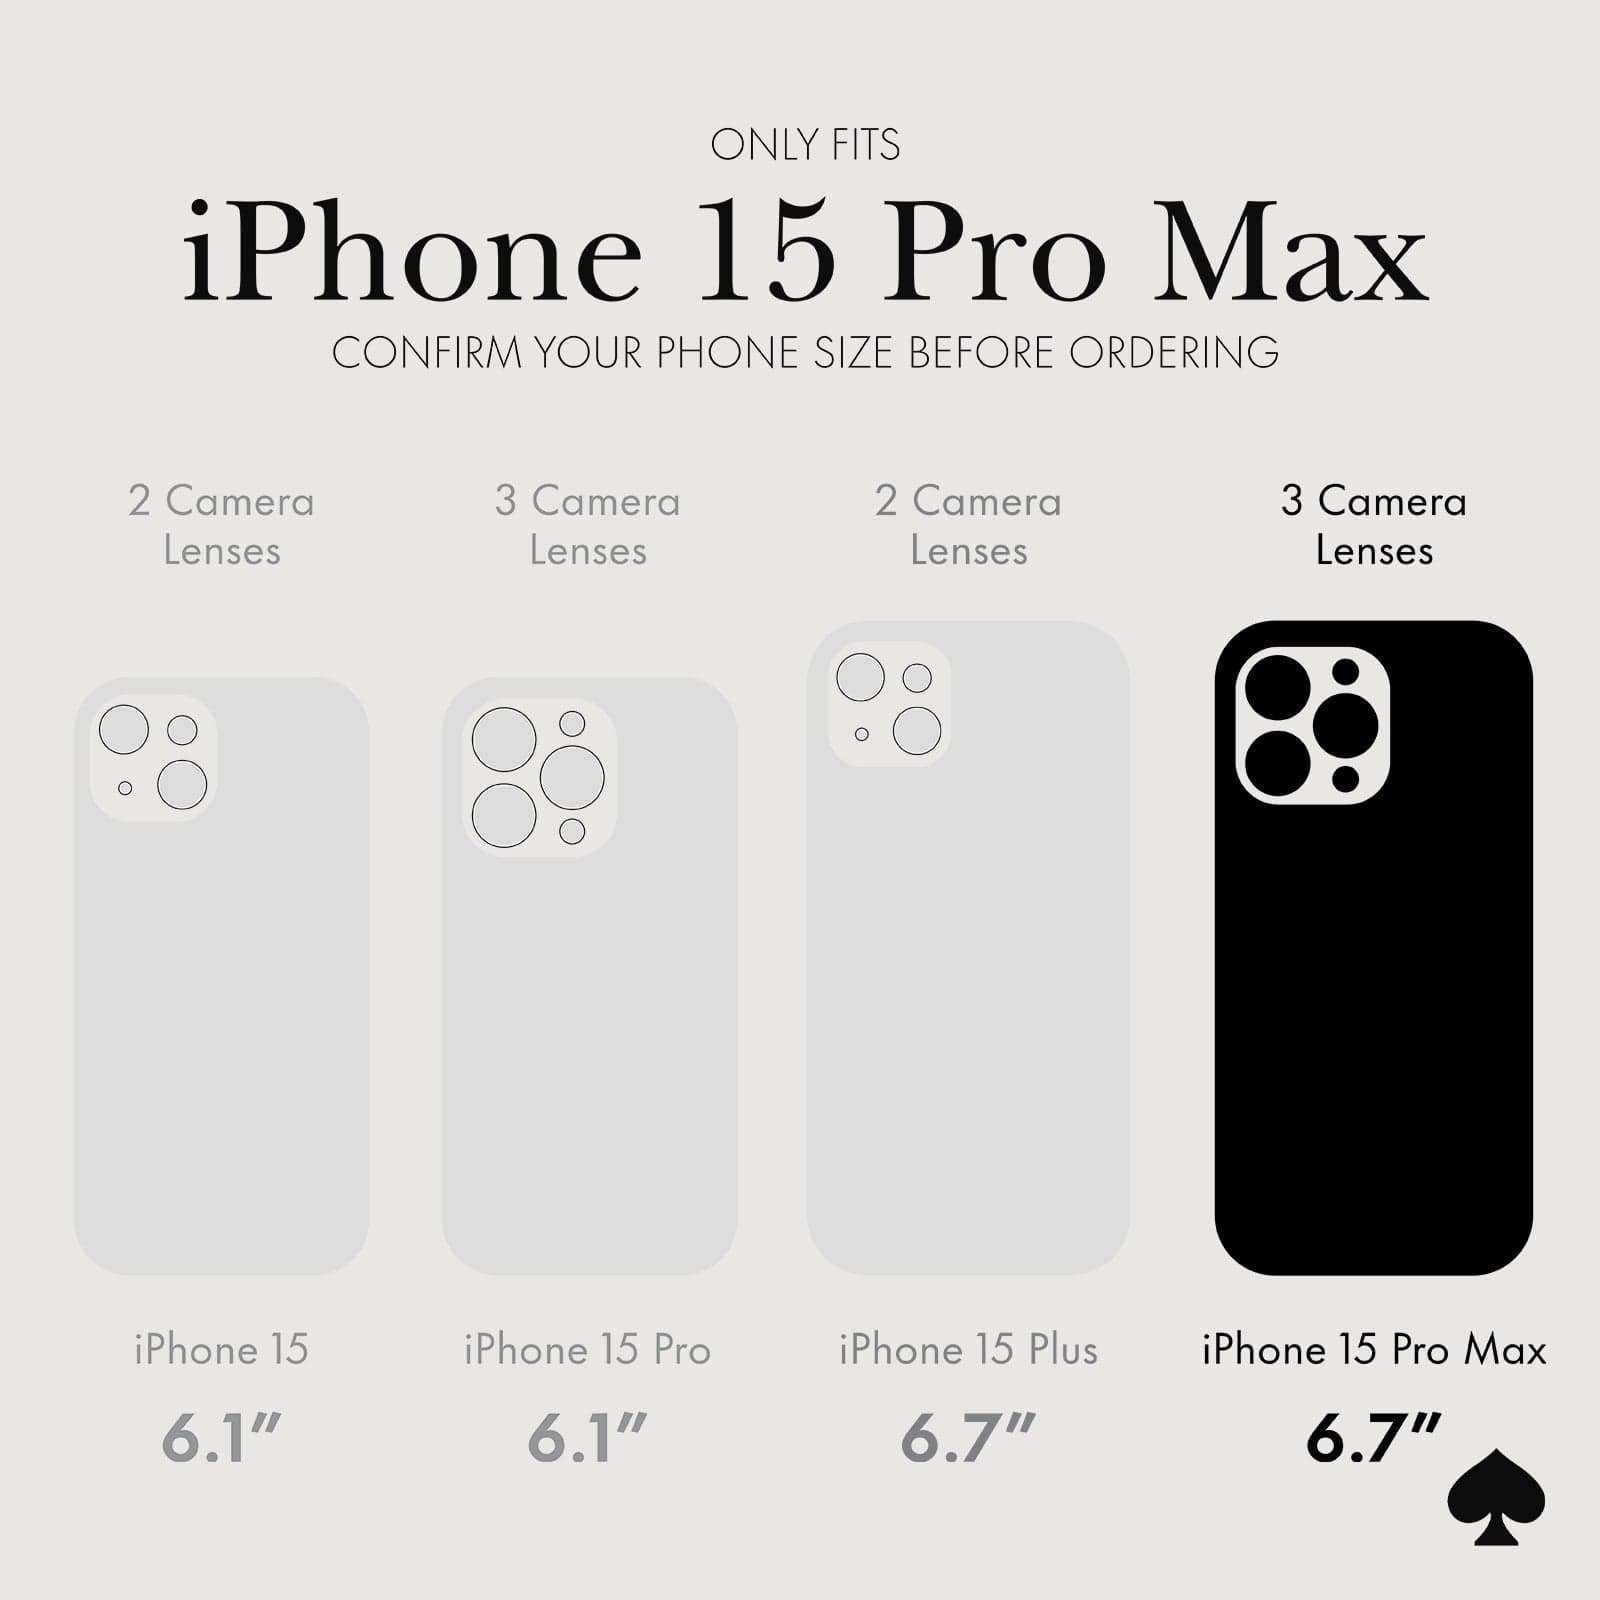 ONLY FITS IPHONE 15 PRO MAX